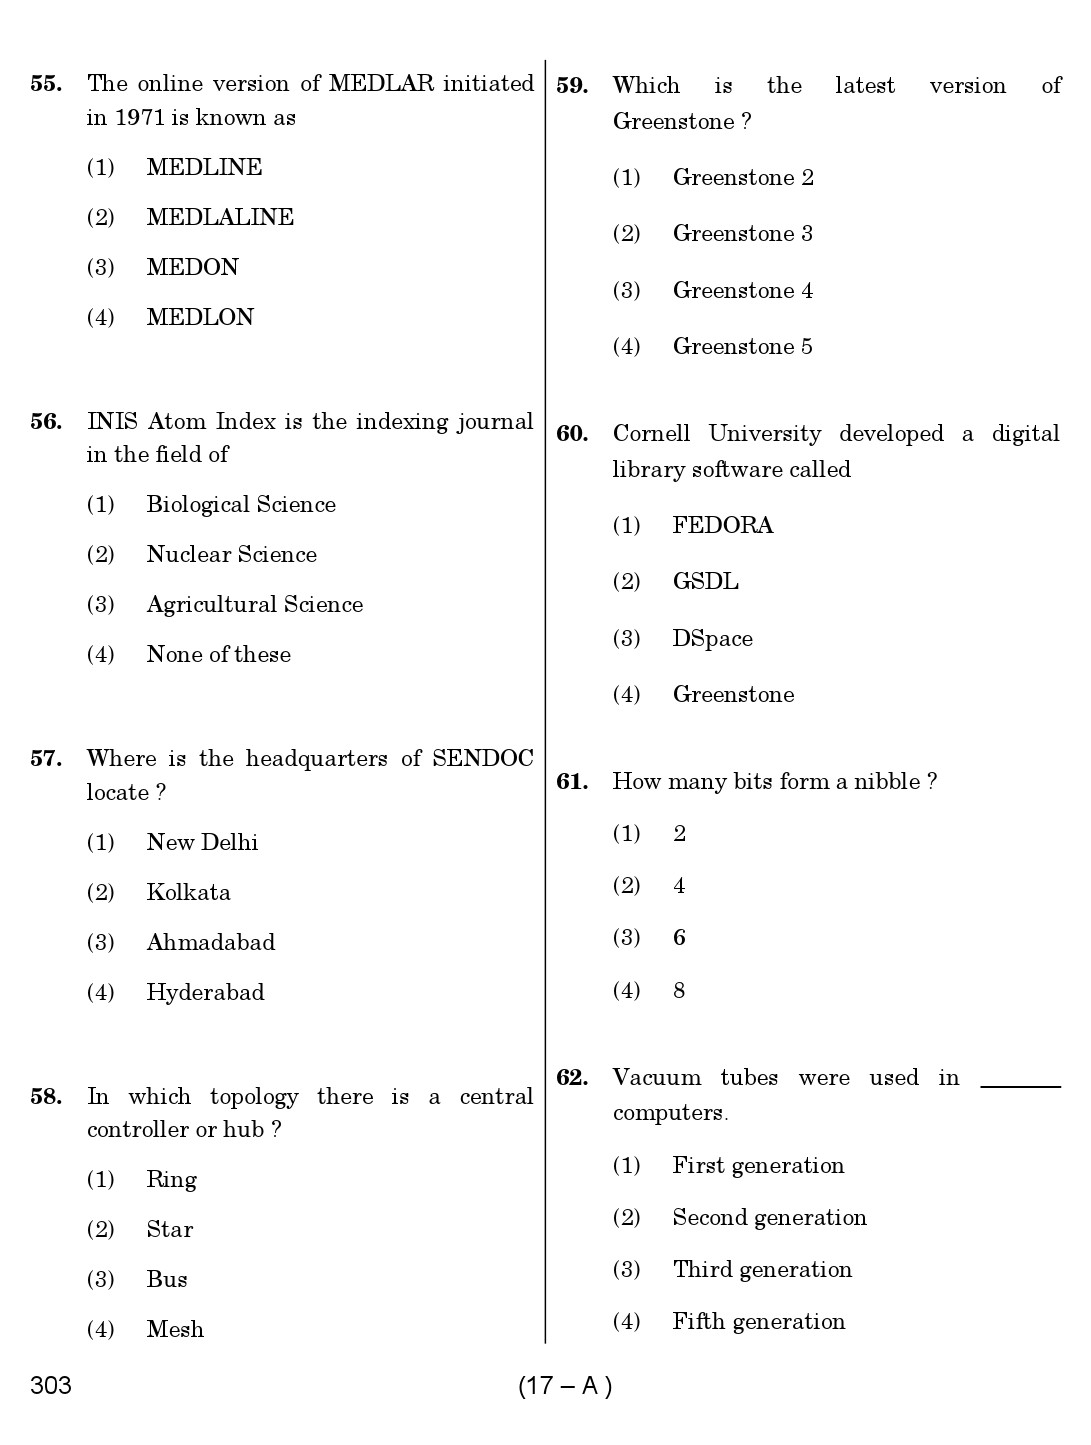 Karnataka PSC 303 Specific Paper II Librarian Exam Sample Question Paper 17